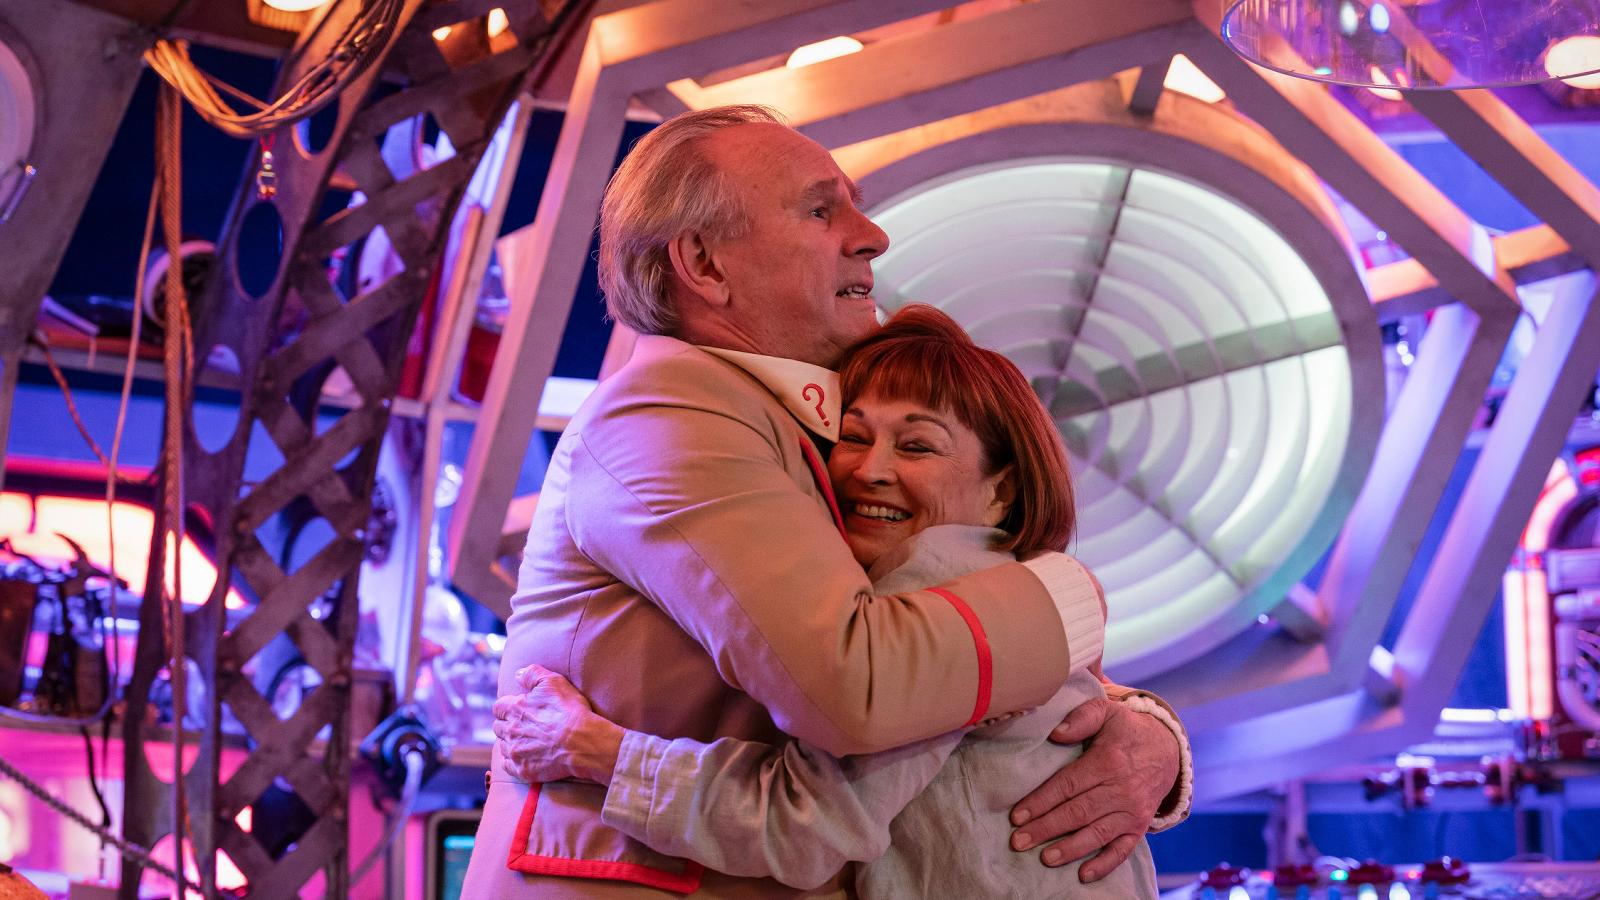 The Fifth Doctor embraces Tegan in Tales of the TARDIS.